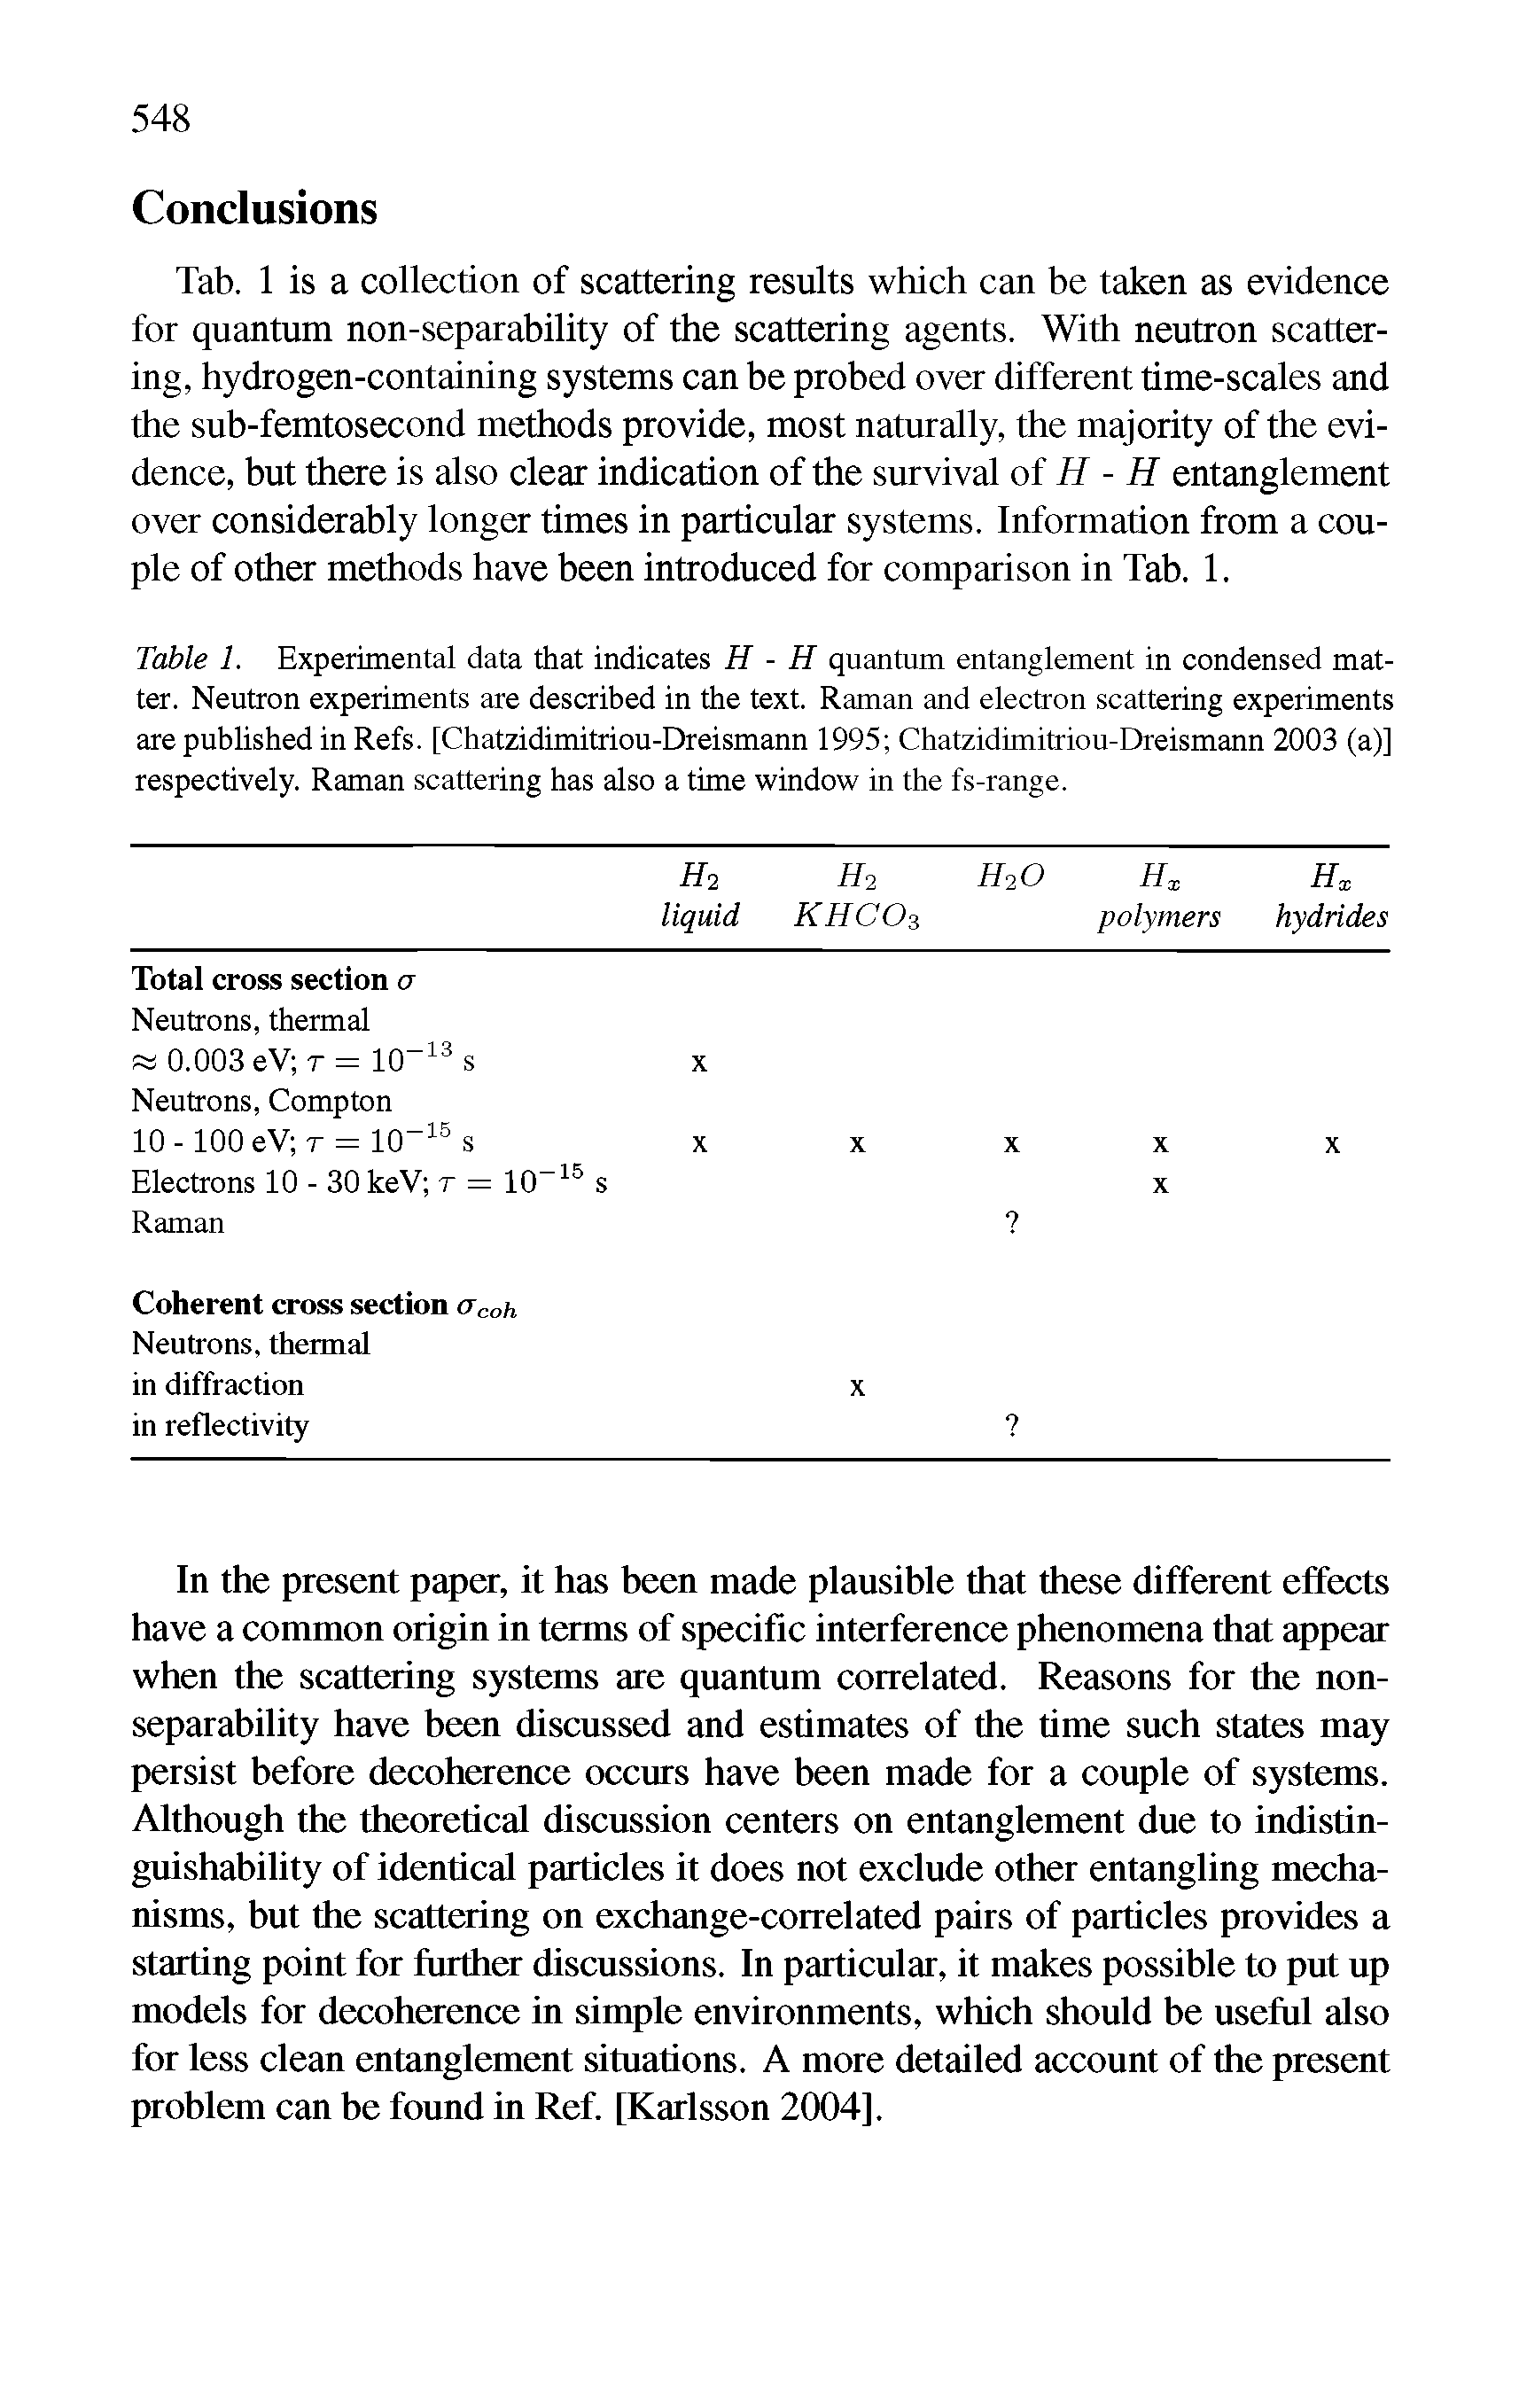 Table 1. Experimental data that indicates H - H quantum entanglement in condensed matter. Neutron experiments are described in the text. Raman and electron scattering experiments are published in Refs. [Chatzidimitriou-Dreismann 1995 Chatzidimitriou-Dreismann 2003 (a)] respectively. Raman scattering has also a time window in the fs-range.